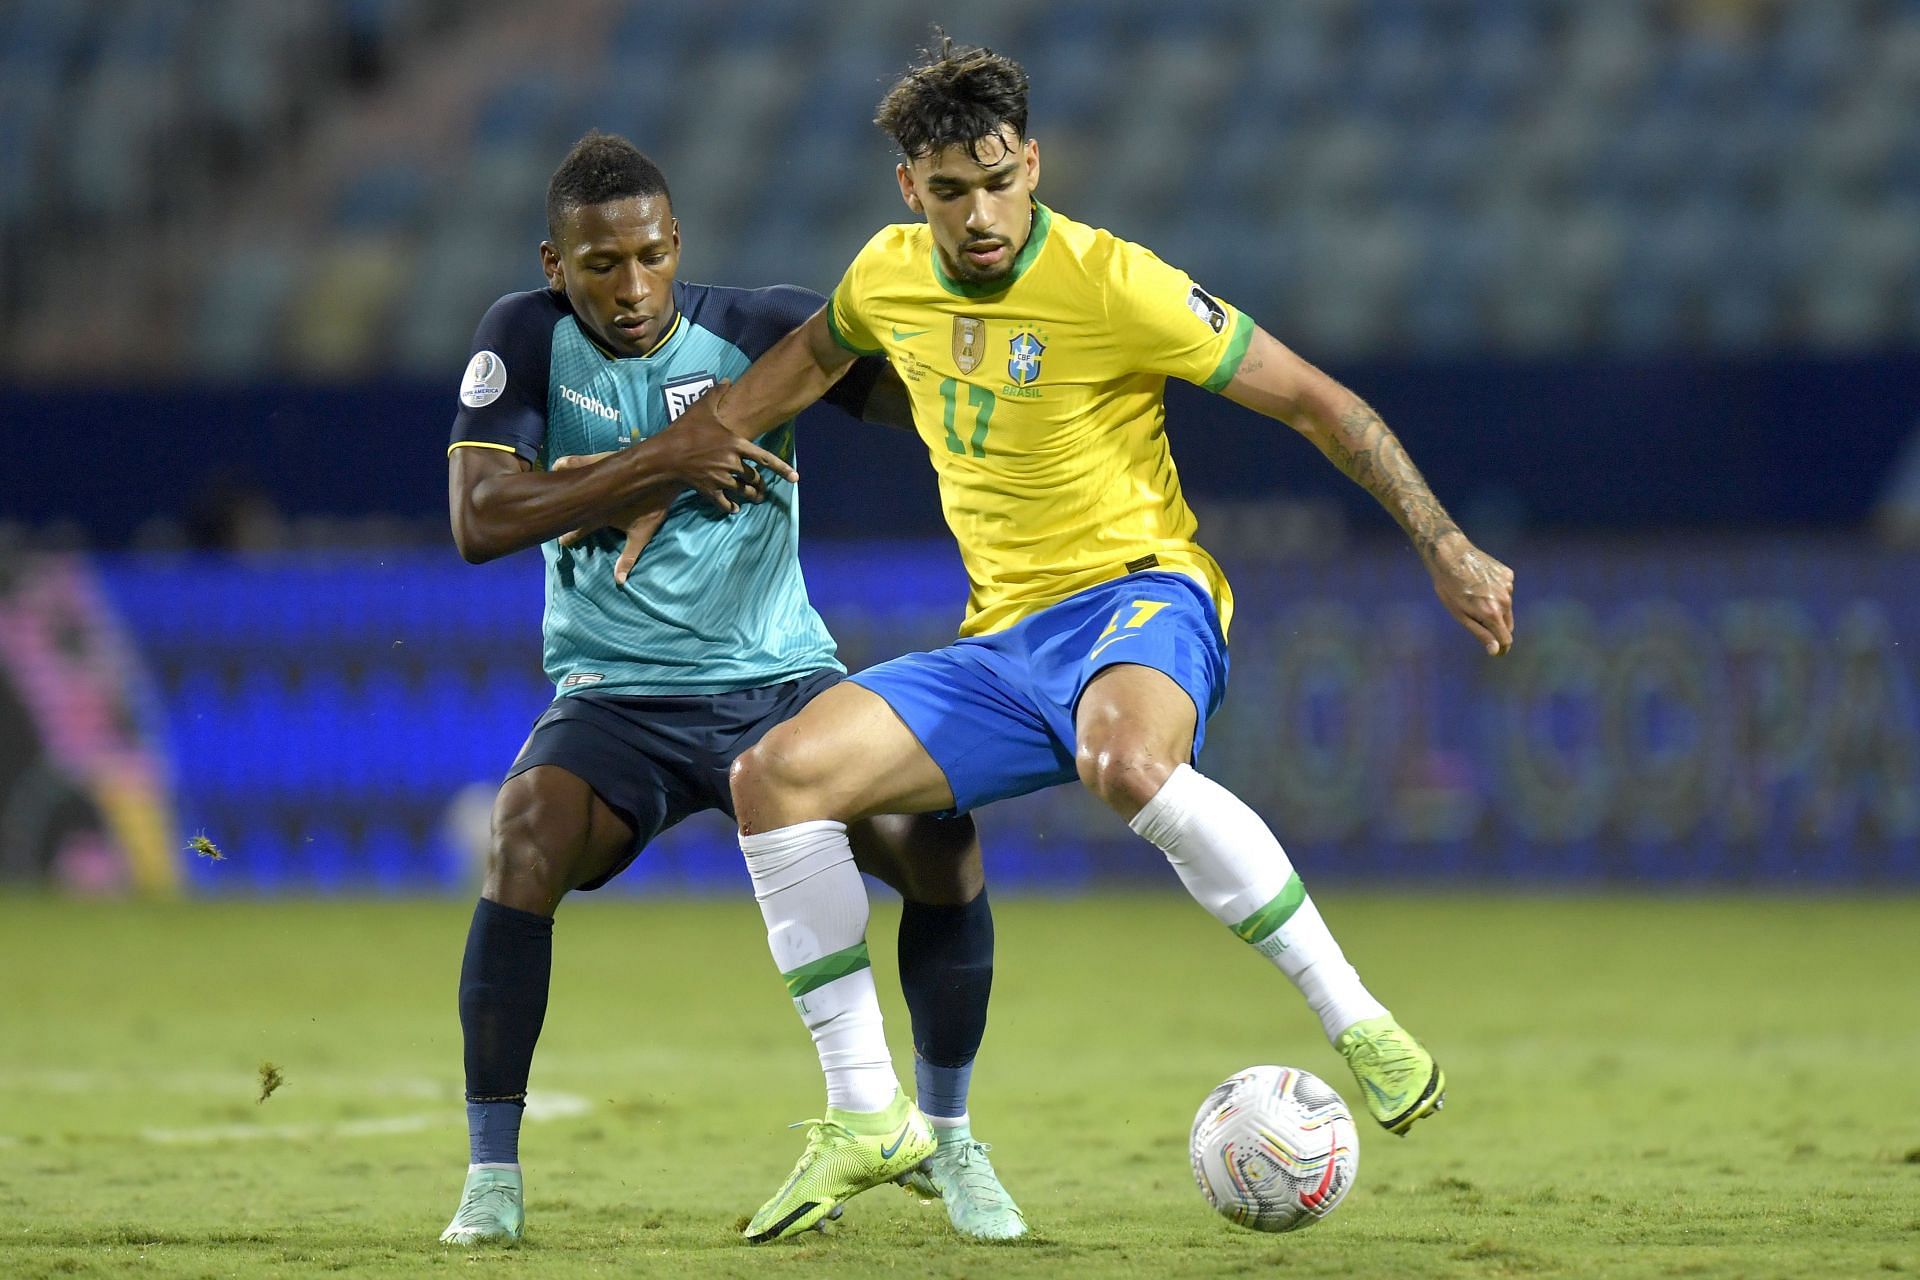 An excellent club form has earned Paqueta (right) a national team call up